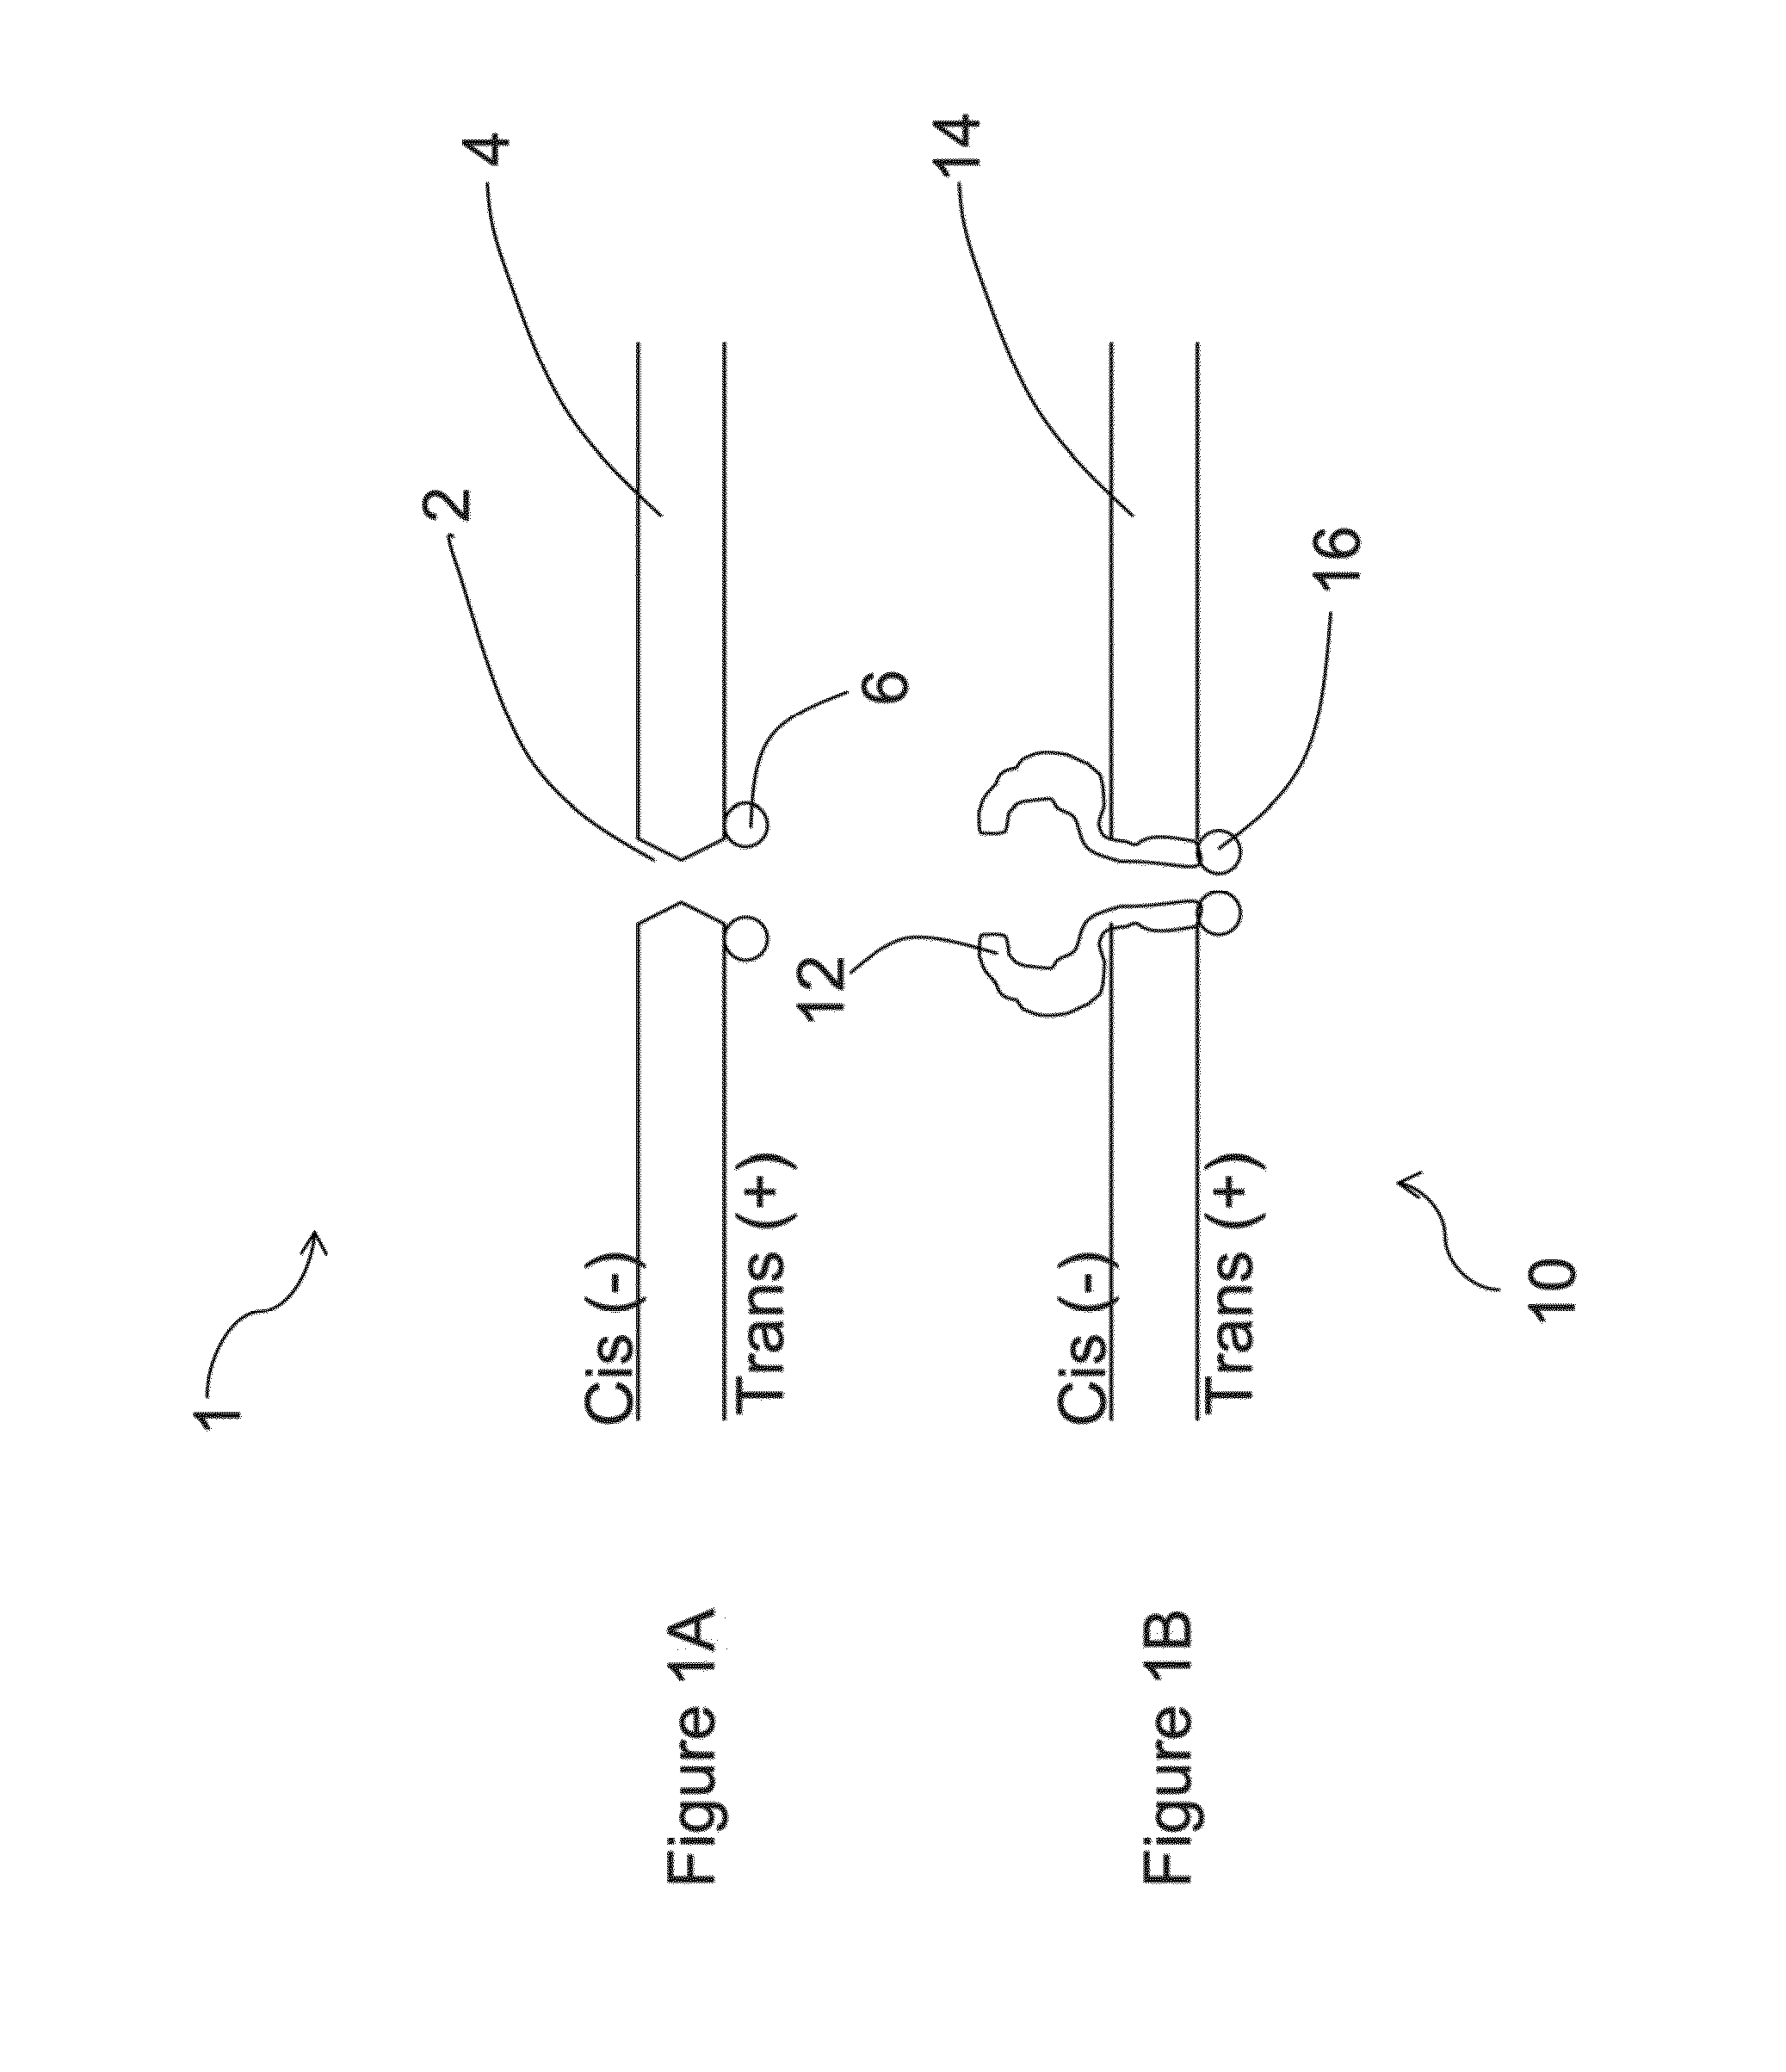 Apparatus and methods for performing optical nanopore detection or sequencing